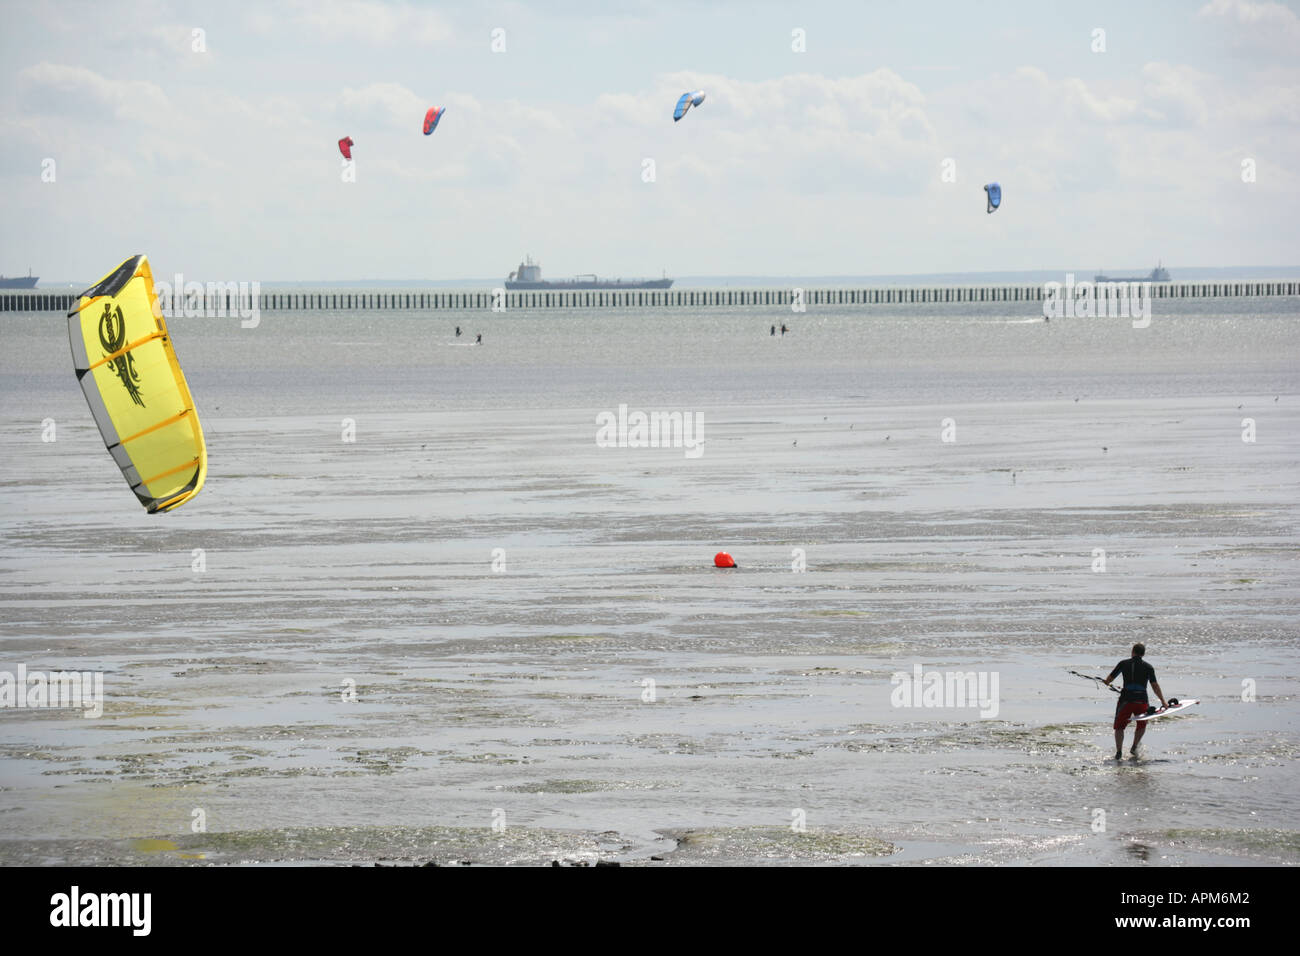 A kite boarding enthusiast making for deeper water Shoebury, Southend on Sea, Essex, England, UK. Stock Photo